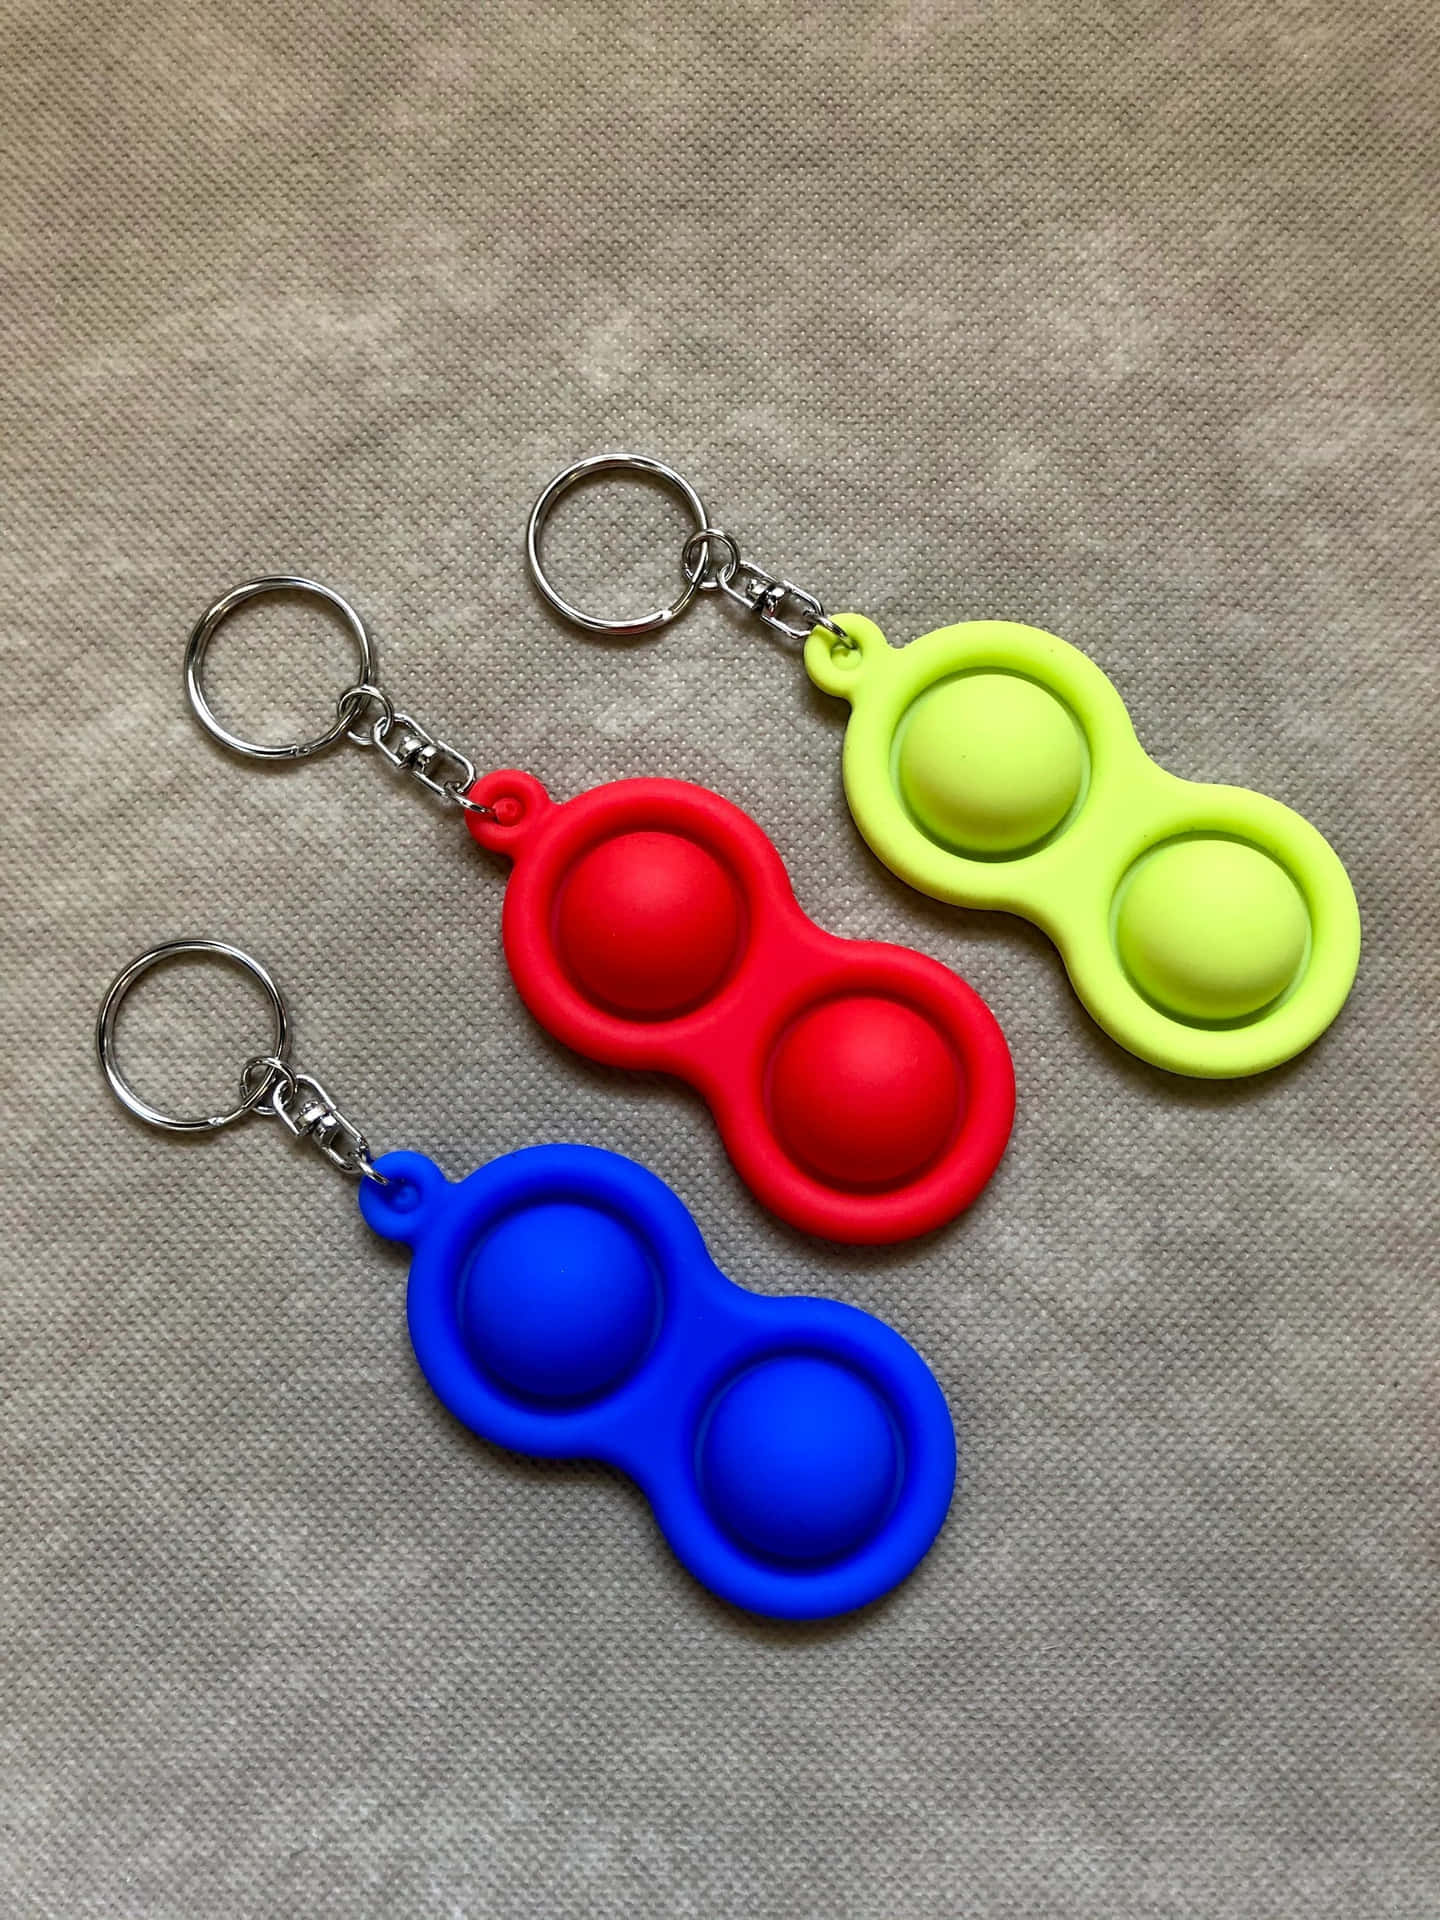 A colorful rainbow of Fidget spinners